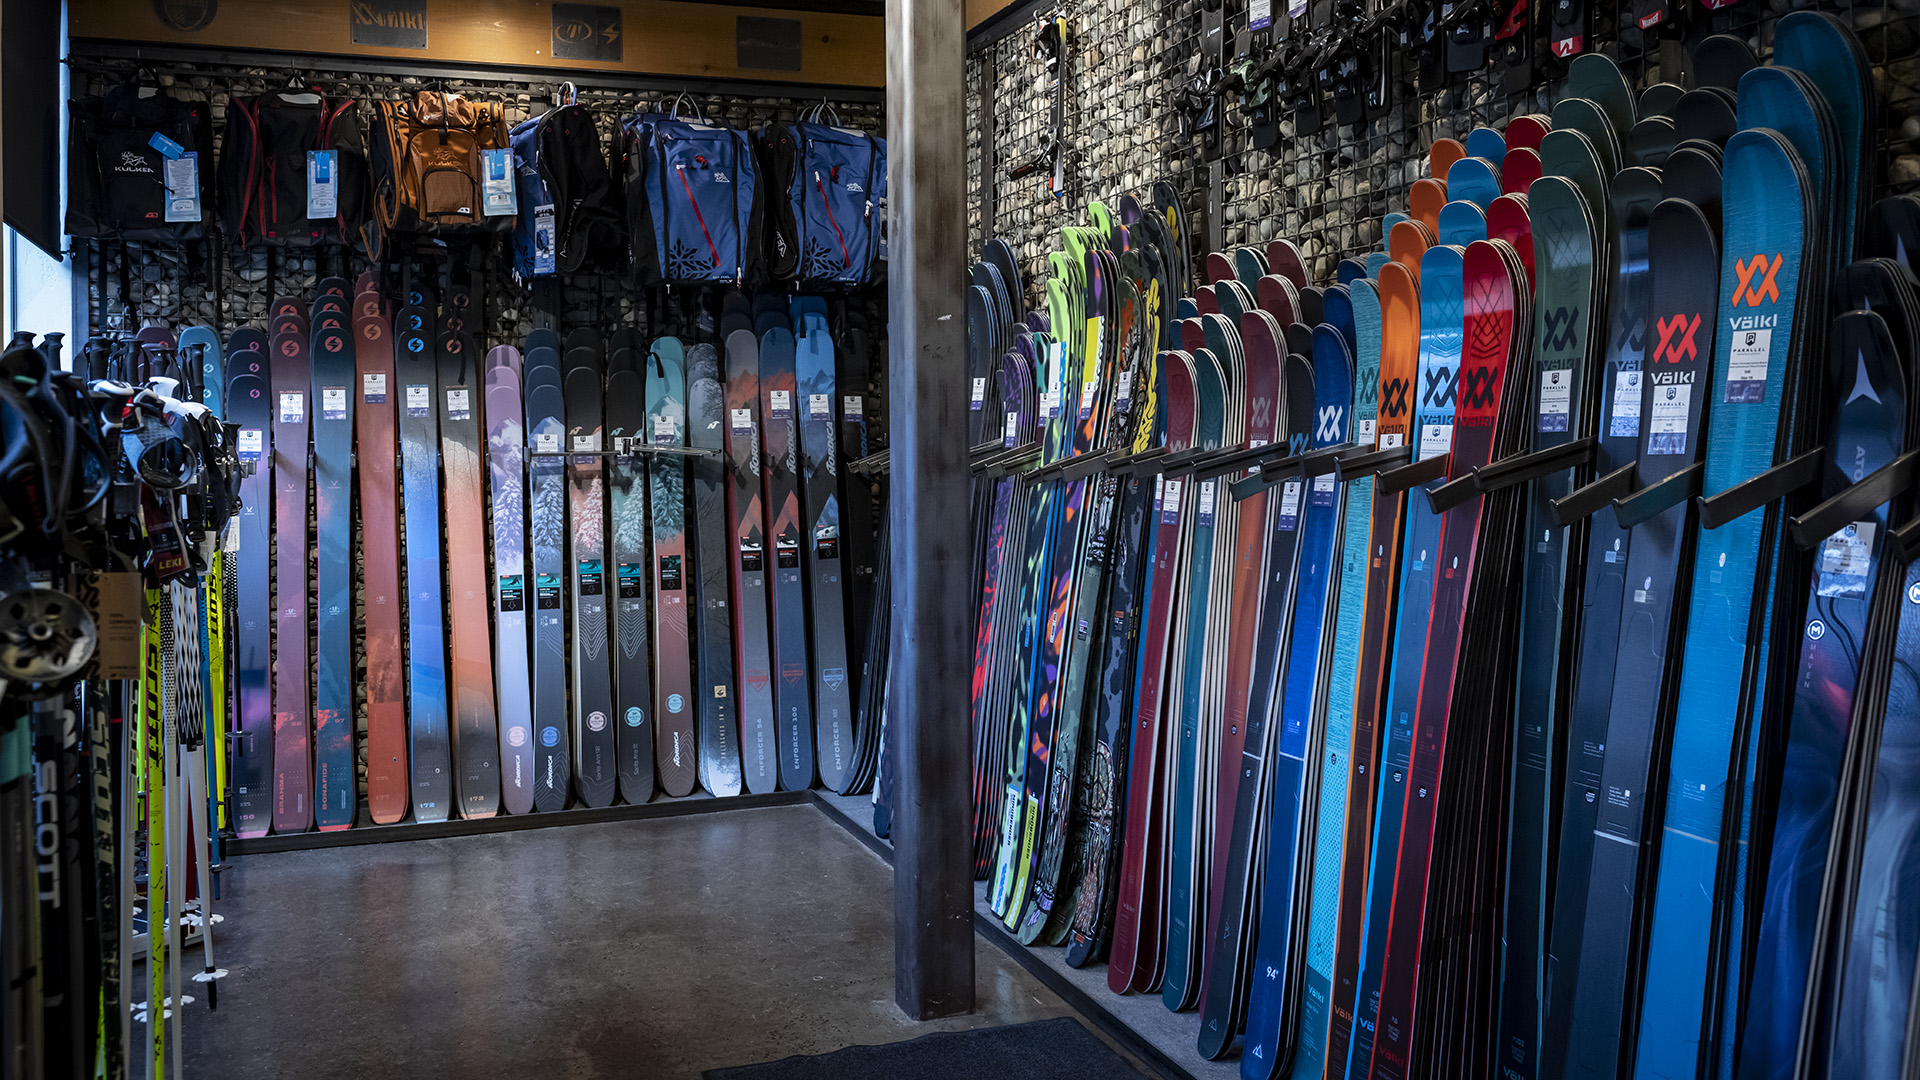 Parallel Sports wide selection of skis to purchase this winter season 